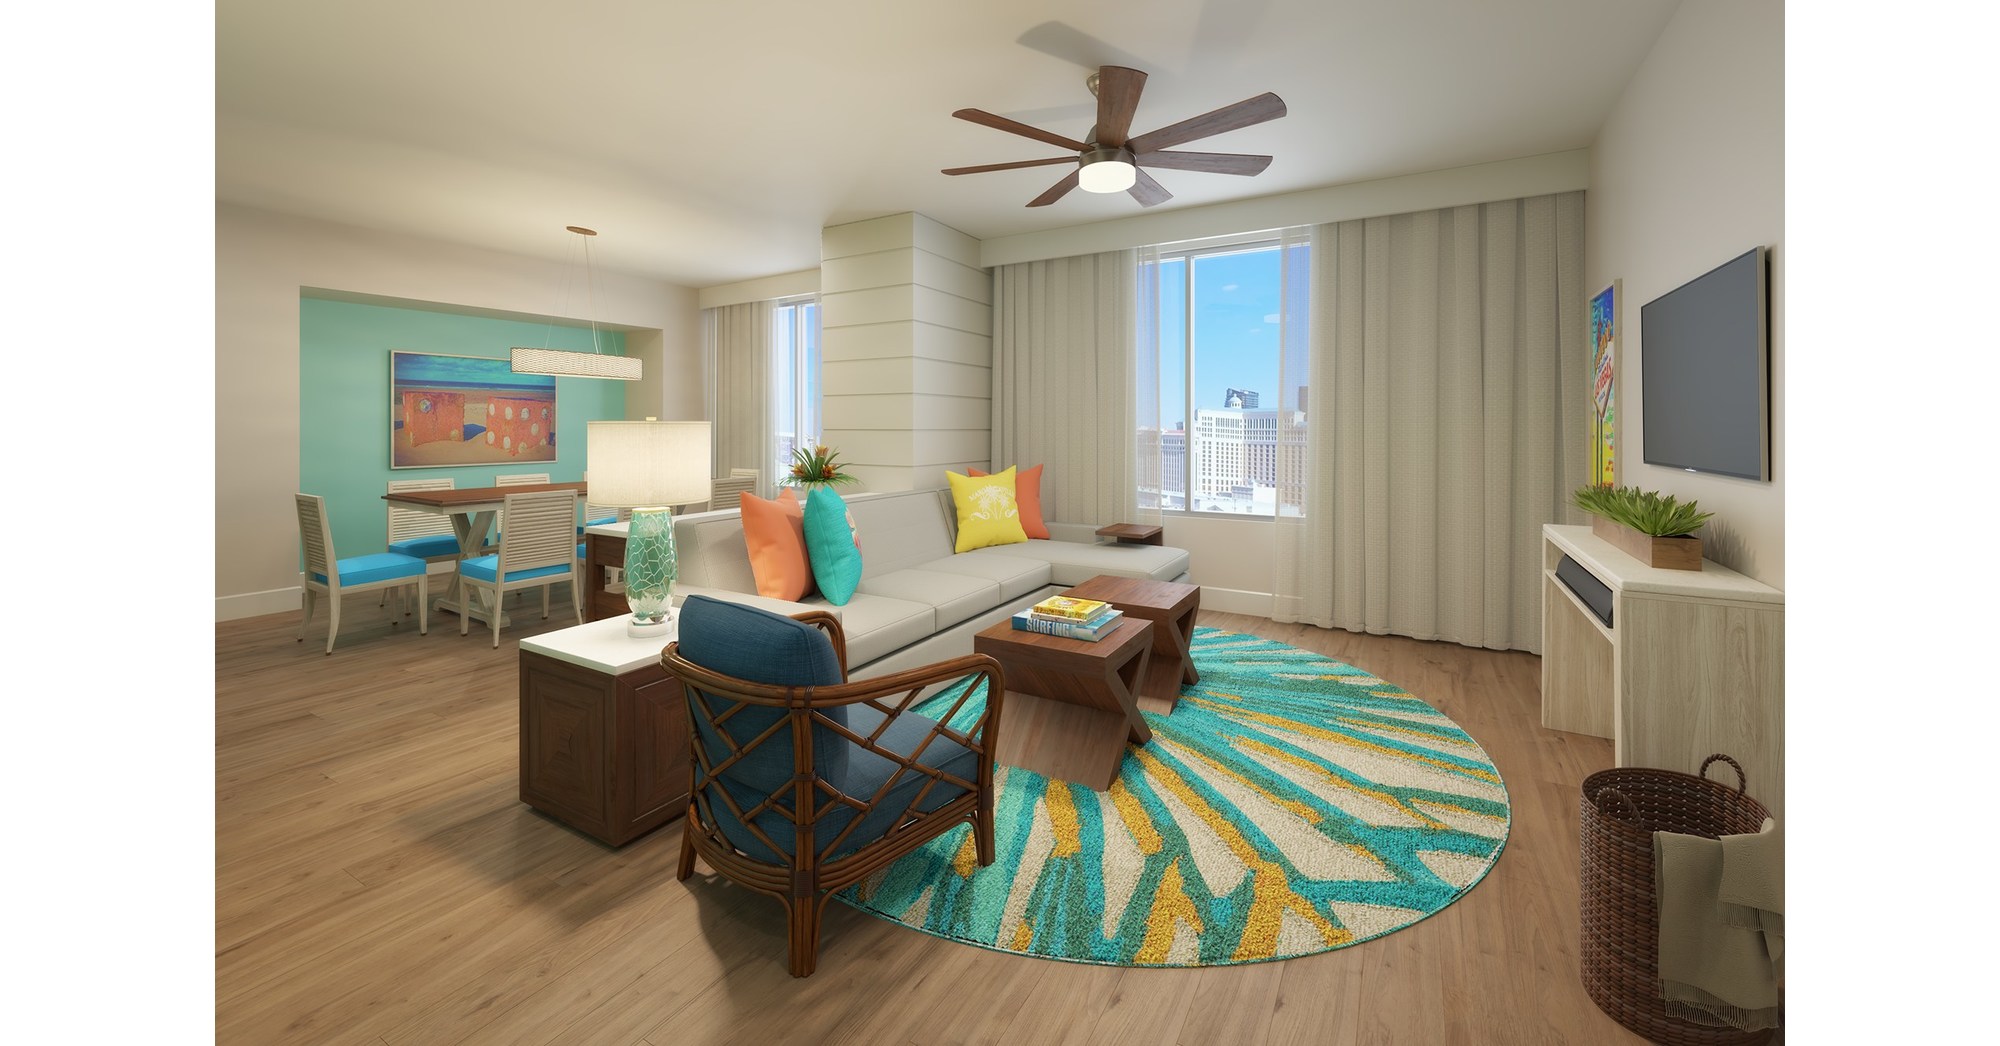 Margaritaville Vacation Club by Wyndham Announces New 